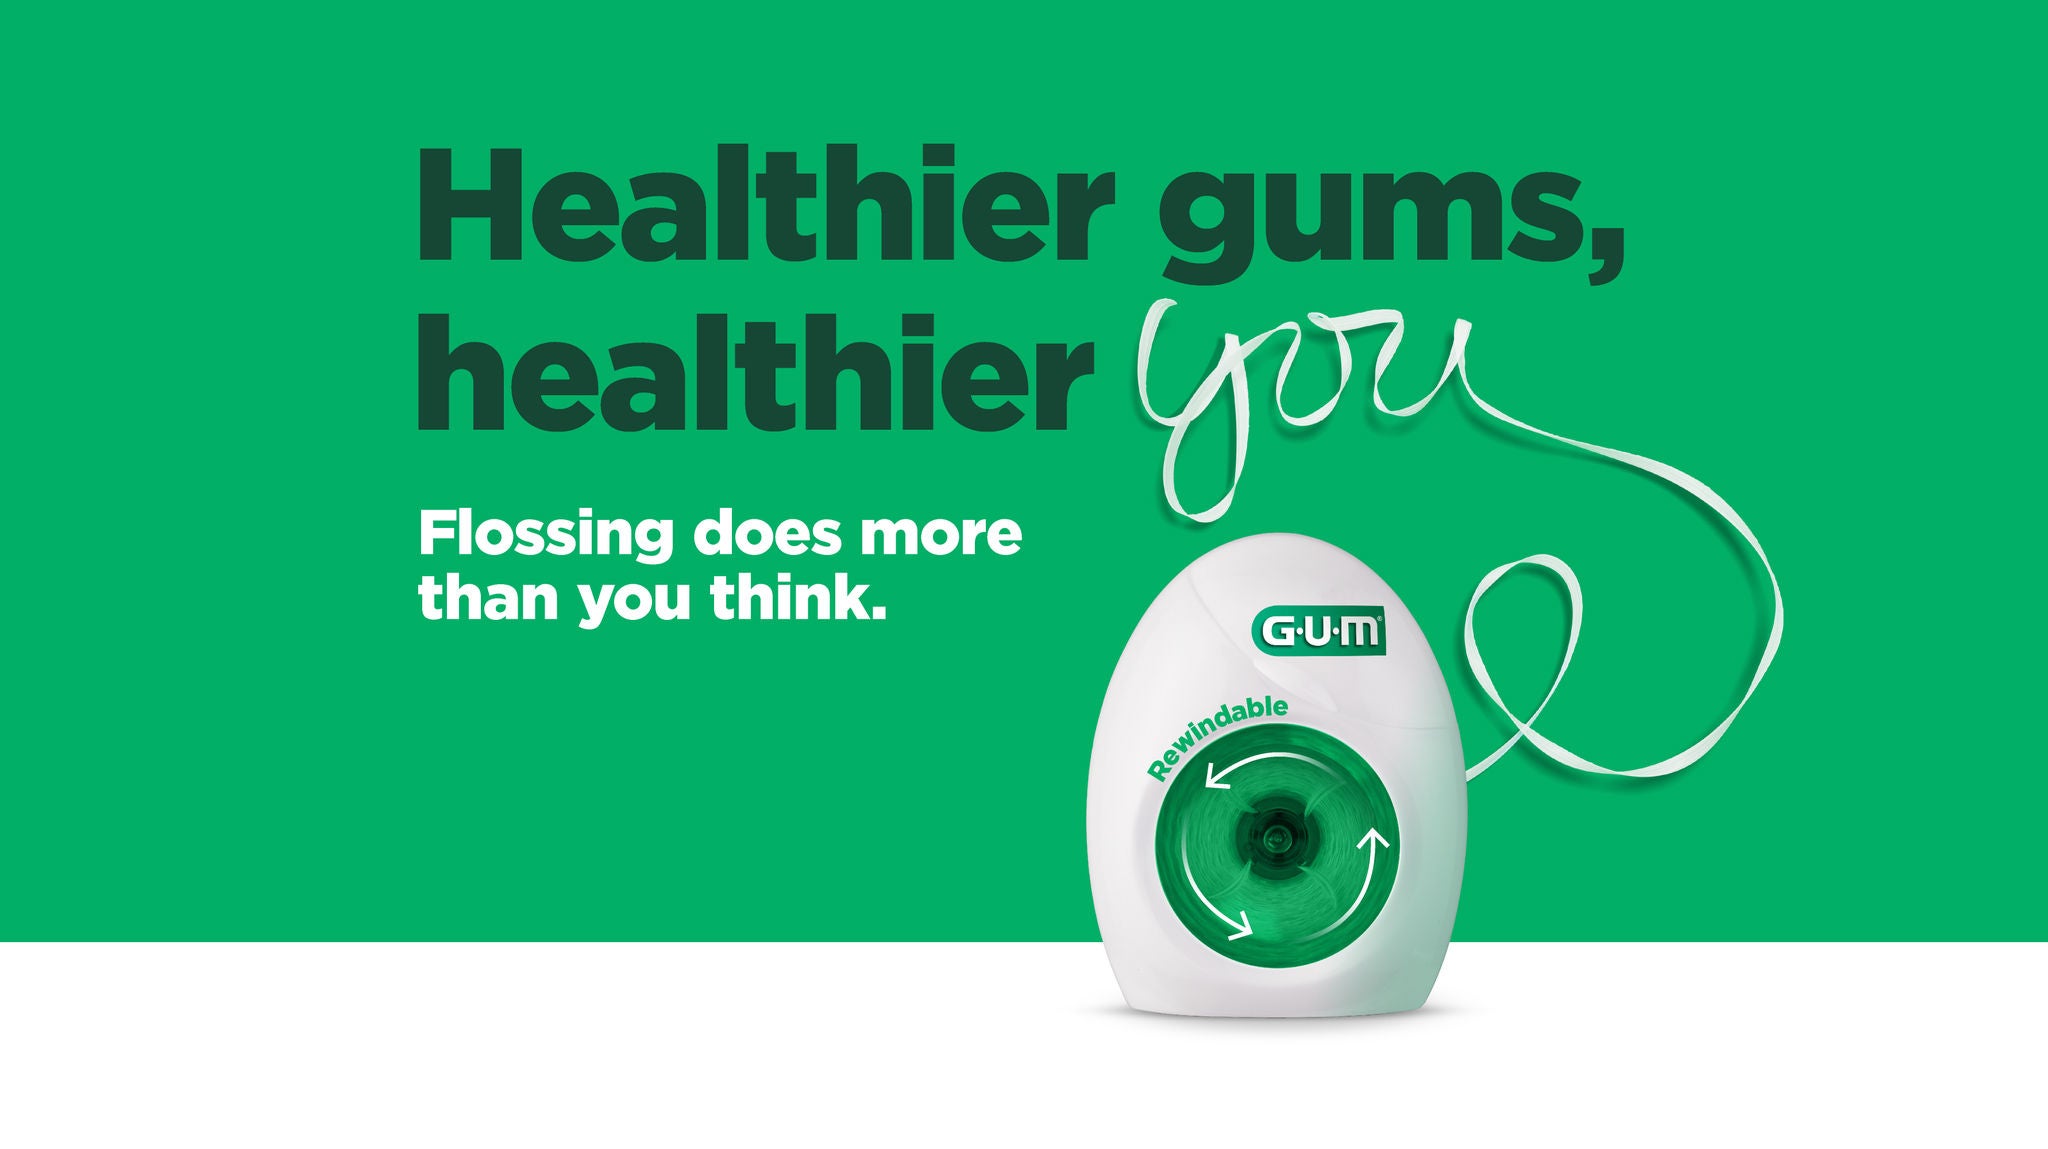 Healthier Gums, Healthier You. Flossing does more than you think.